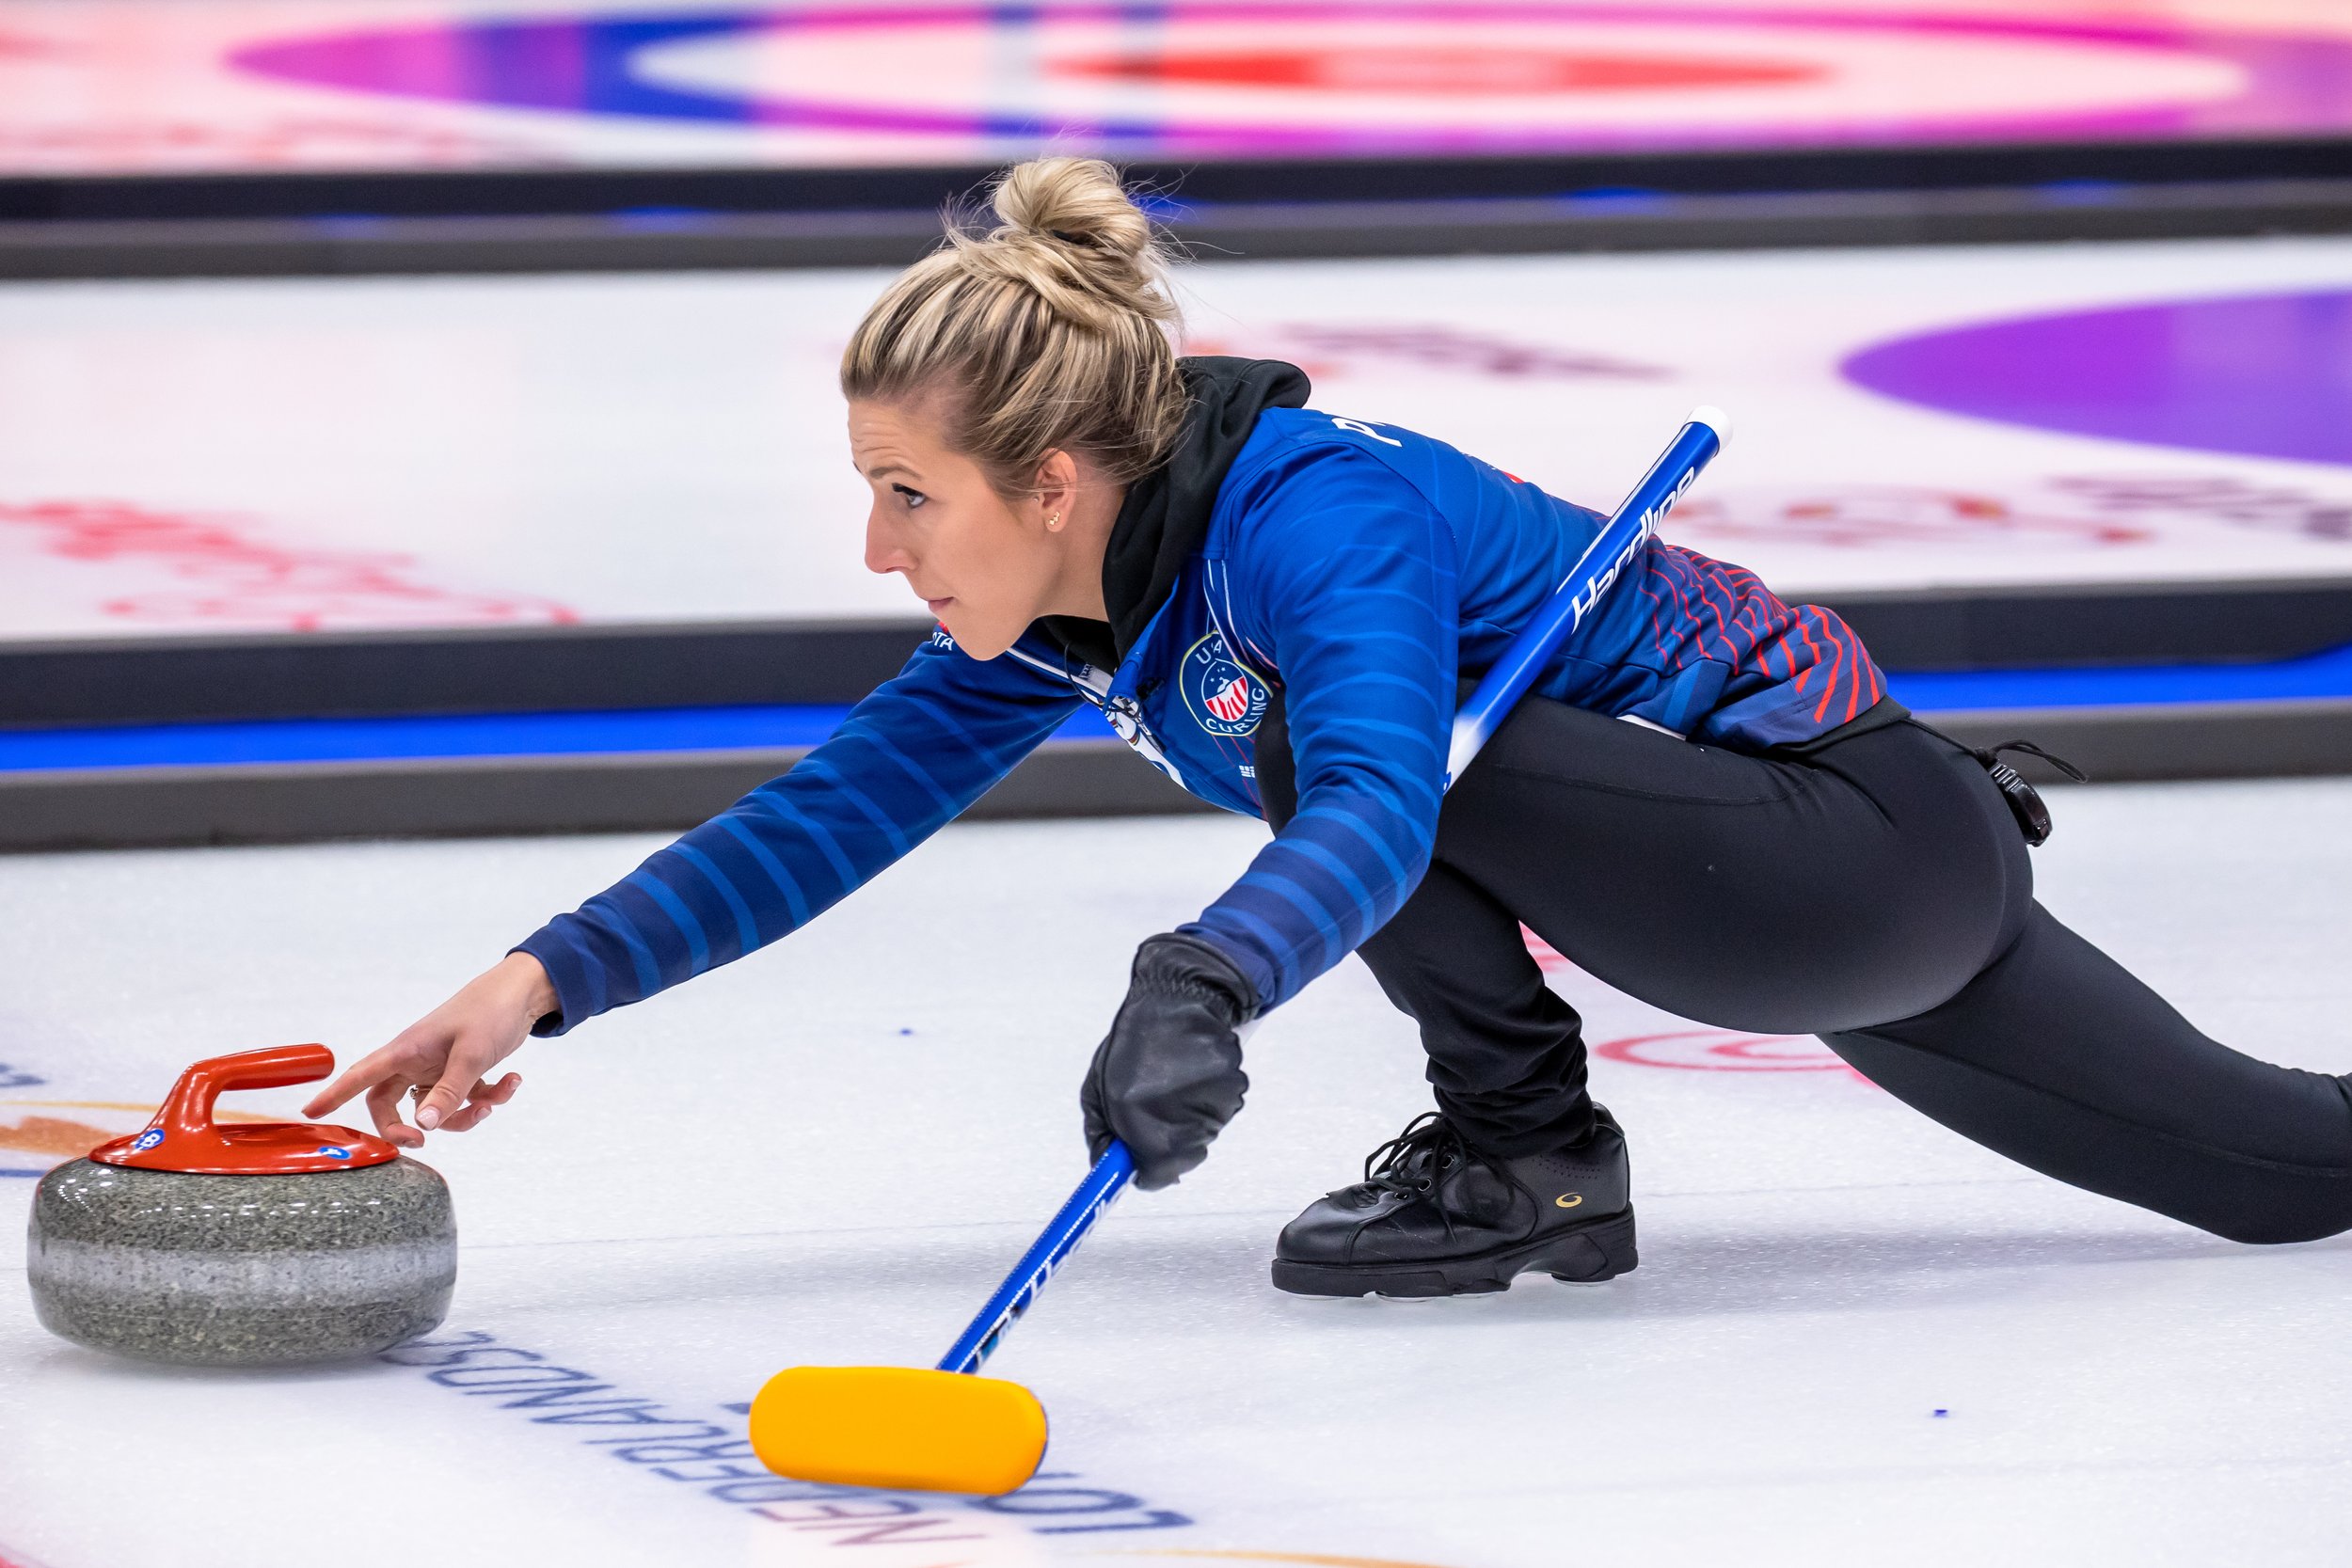 PERFECT START FOR TEAM USA AT MIXED DOUBLES OLYMPIC QUALIFICATION EVENT — USA CURLING